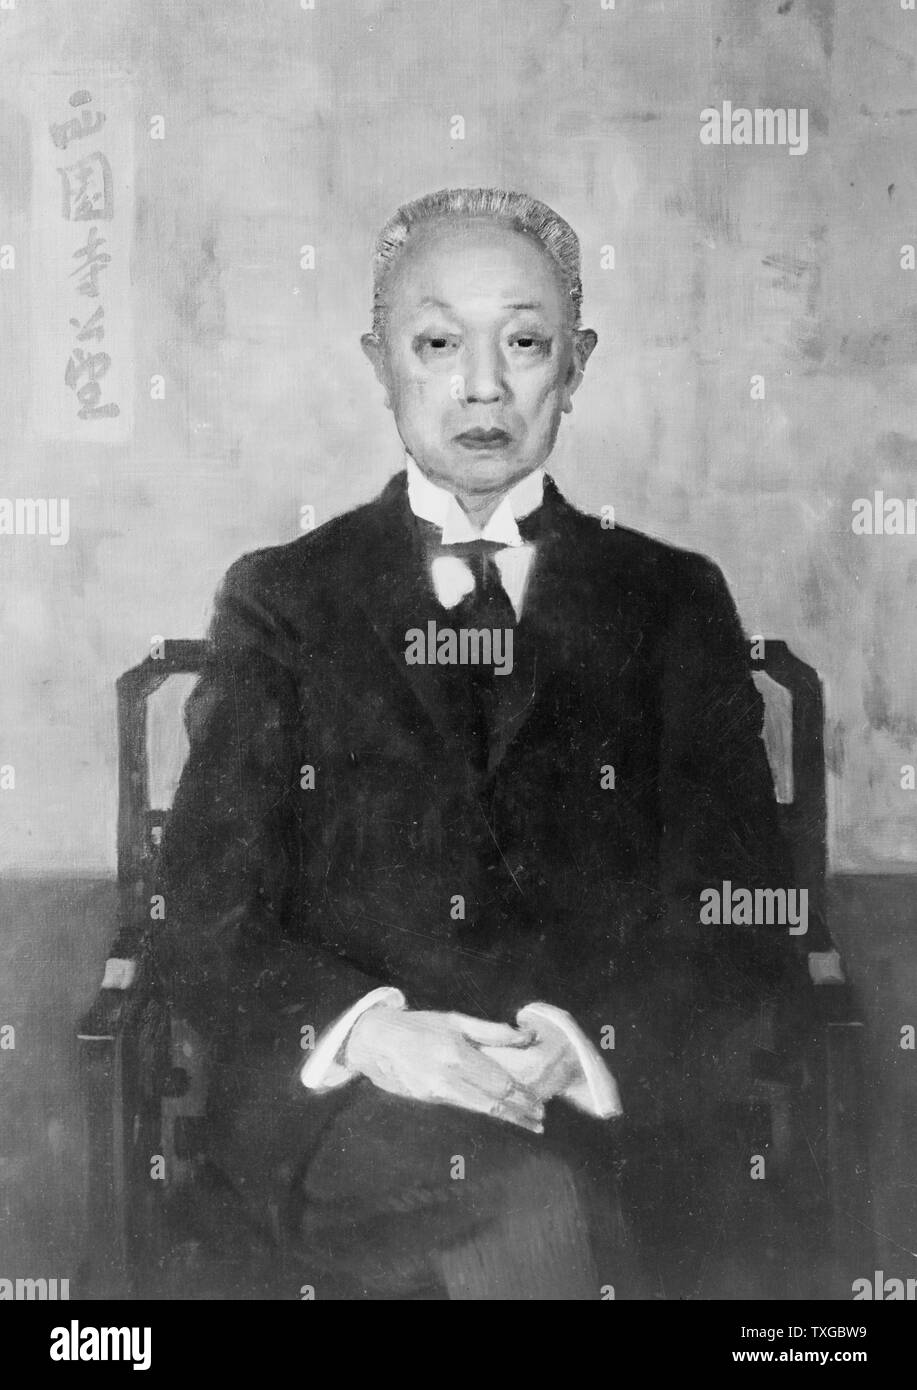 Prince Saionji Kinmochi (December 7, 1849 – November 24, 1940) was a Japanese politician, statesman and twice Prime Minister of Japan. His title does not signify the son of an emperor, but the highest rank of Japanese hereditary nobility, he was elevated from marquis to prince in 1920. As the last surviving genro, he was Japan's most honoured statesman of the 1920s and 1930s. Stock Photo